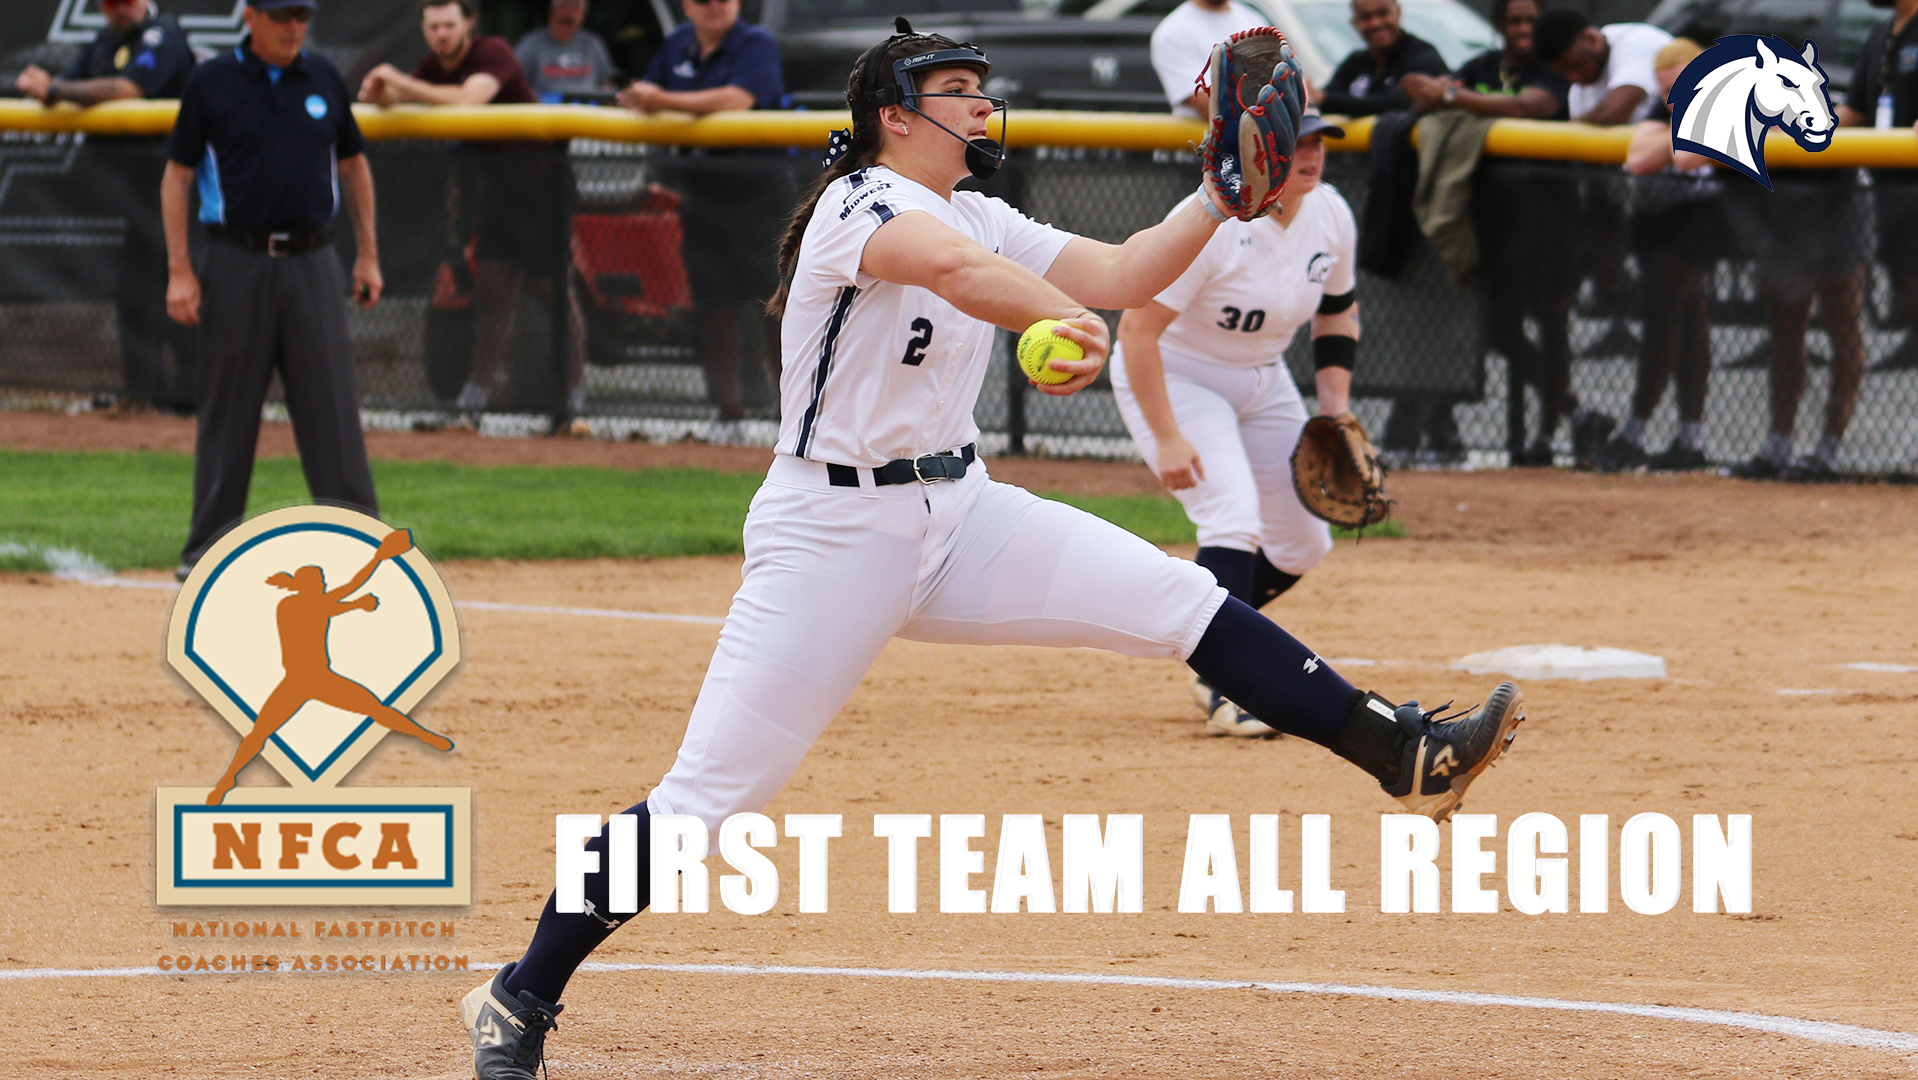 Chargers' Joni Russell earns NFCA First Team All-Region honors